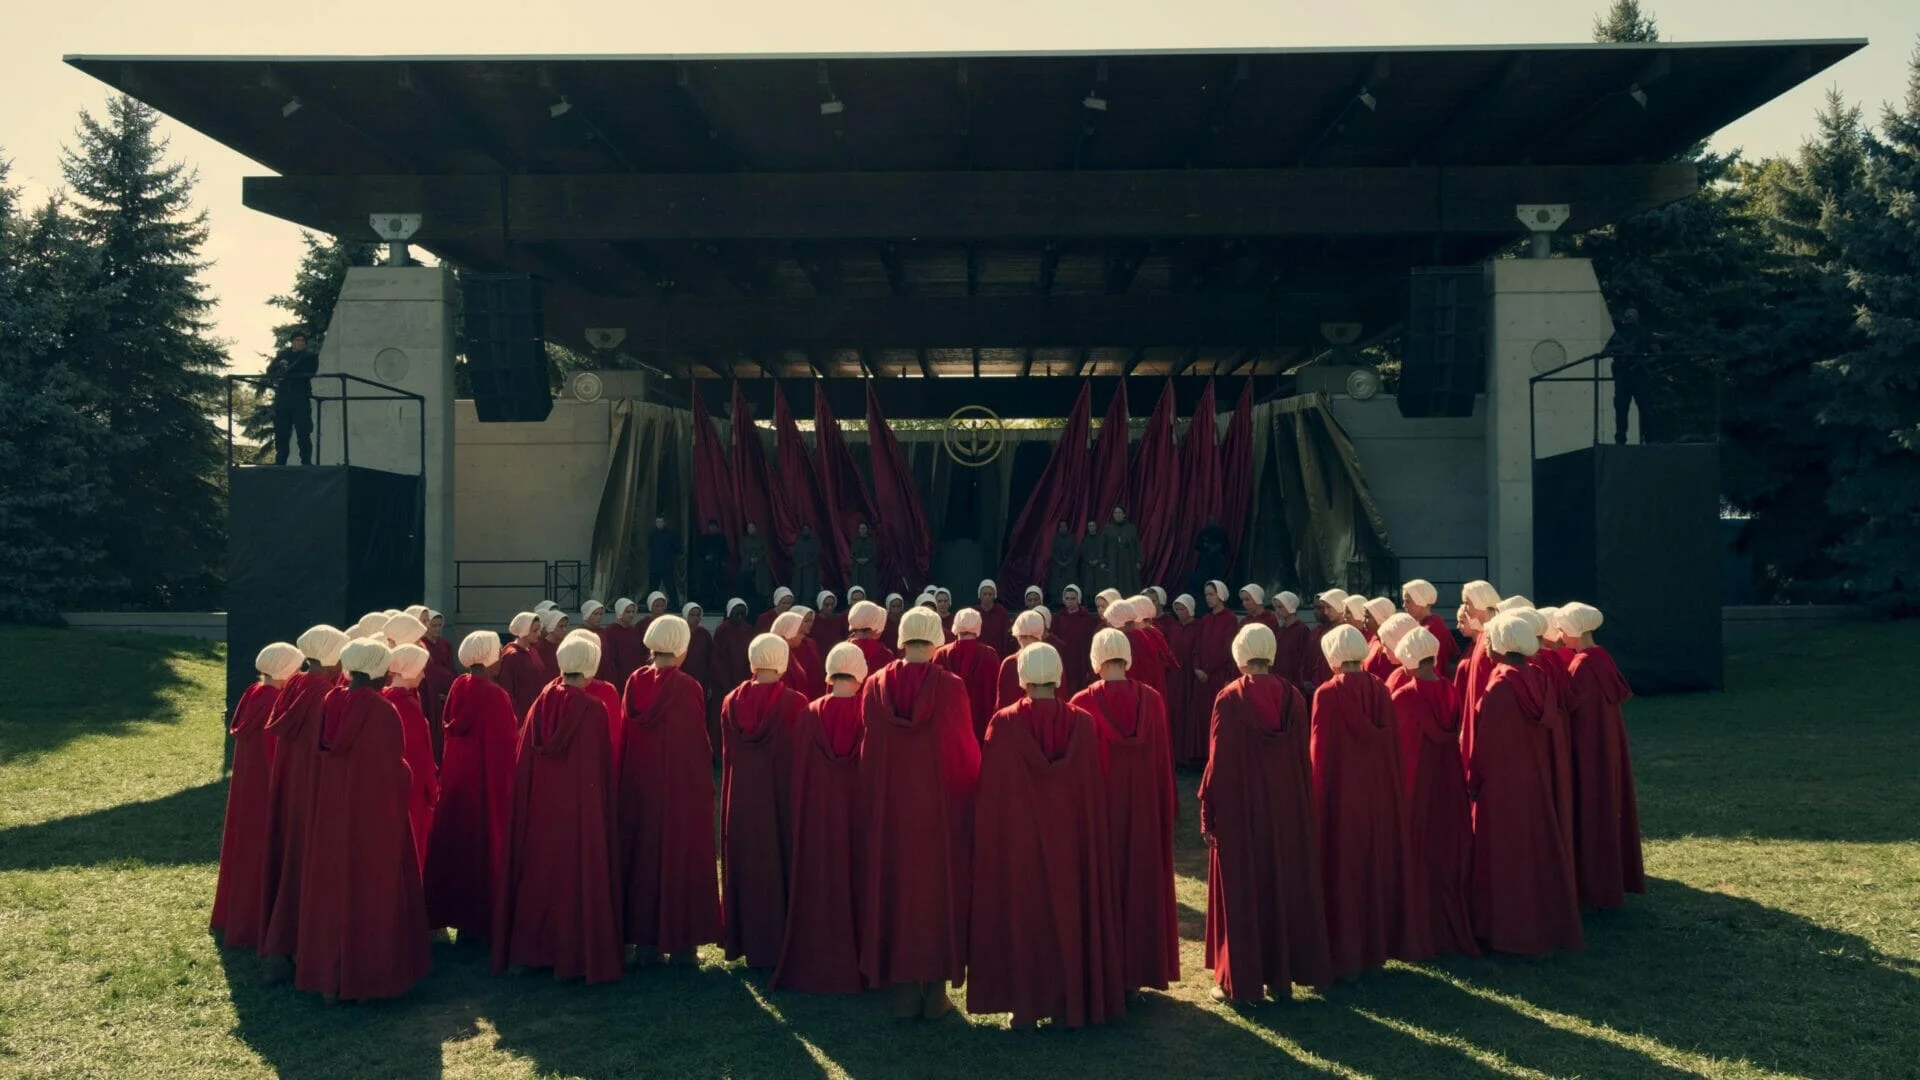 The Handmaid's Tale | It’s all much more than fiction